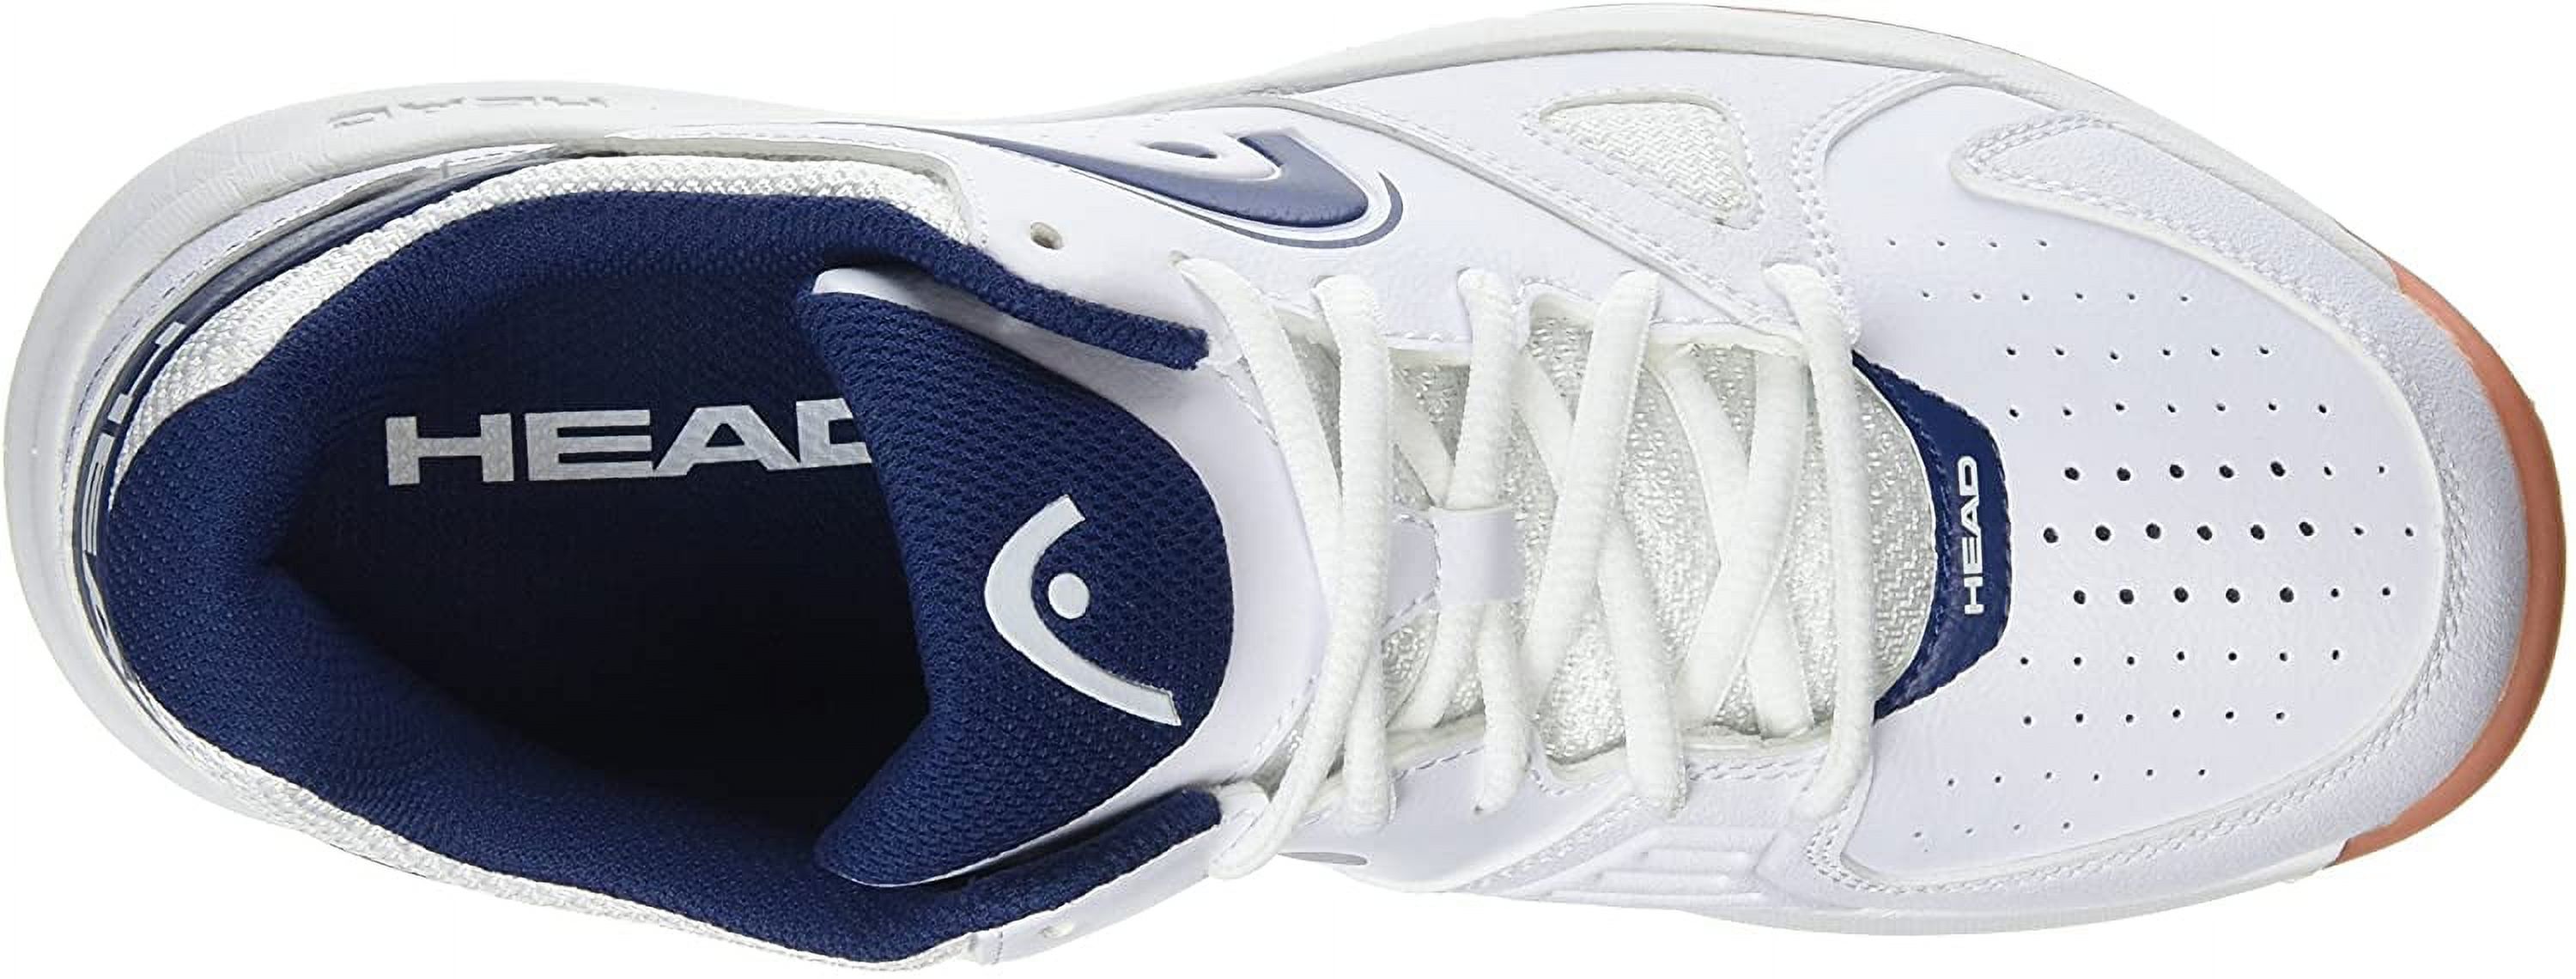 HEAD Men's Grid 2.0 Low Racquetball/Squash Indoor Court Shoes (Non-Marking) (White/Navy) 12.0 (D) US - image 5 of 7